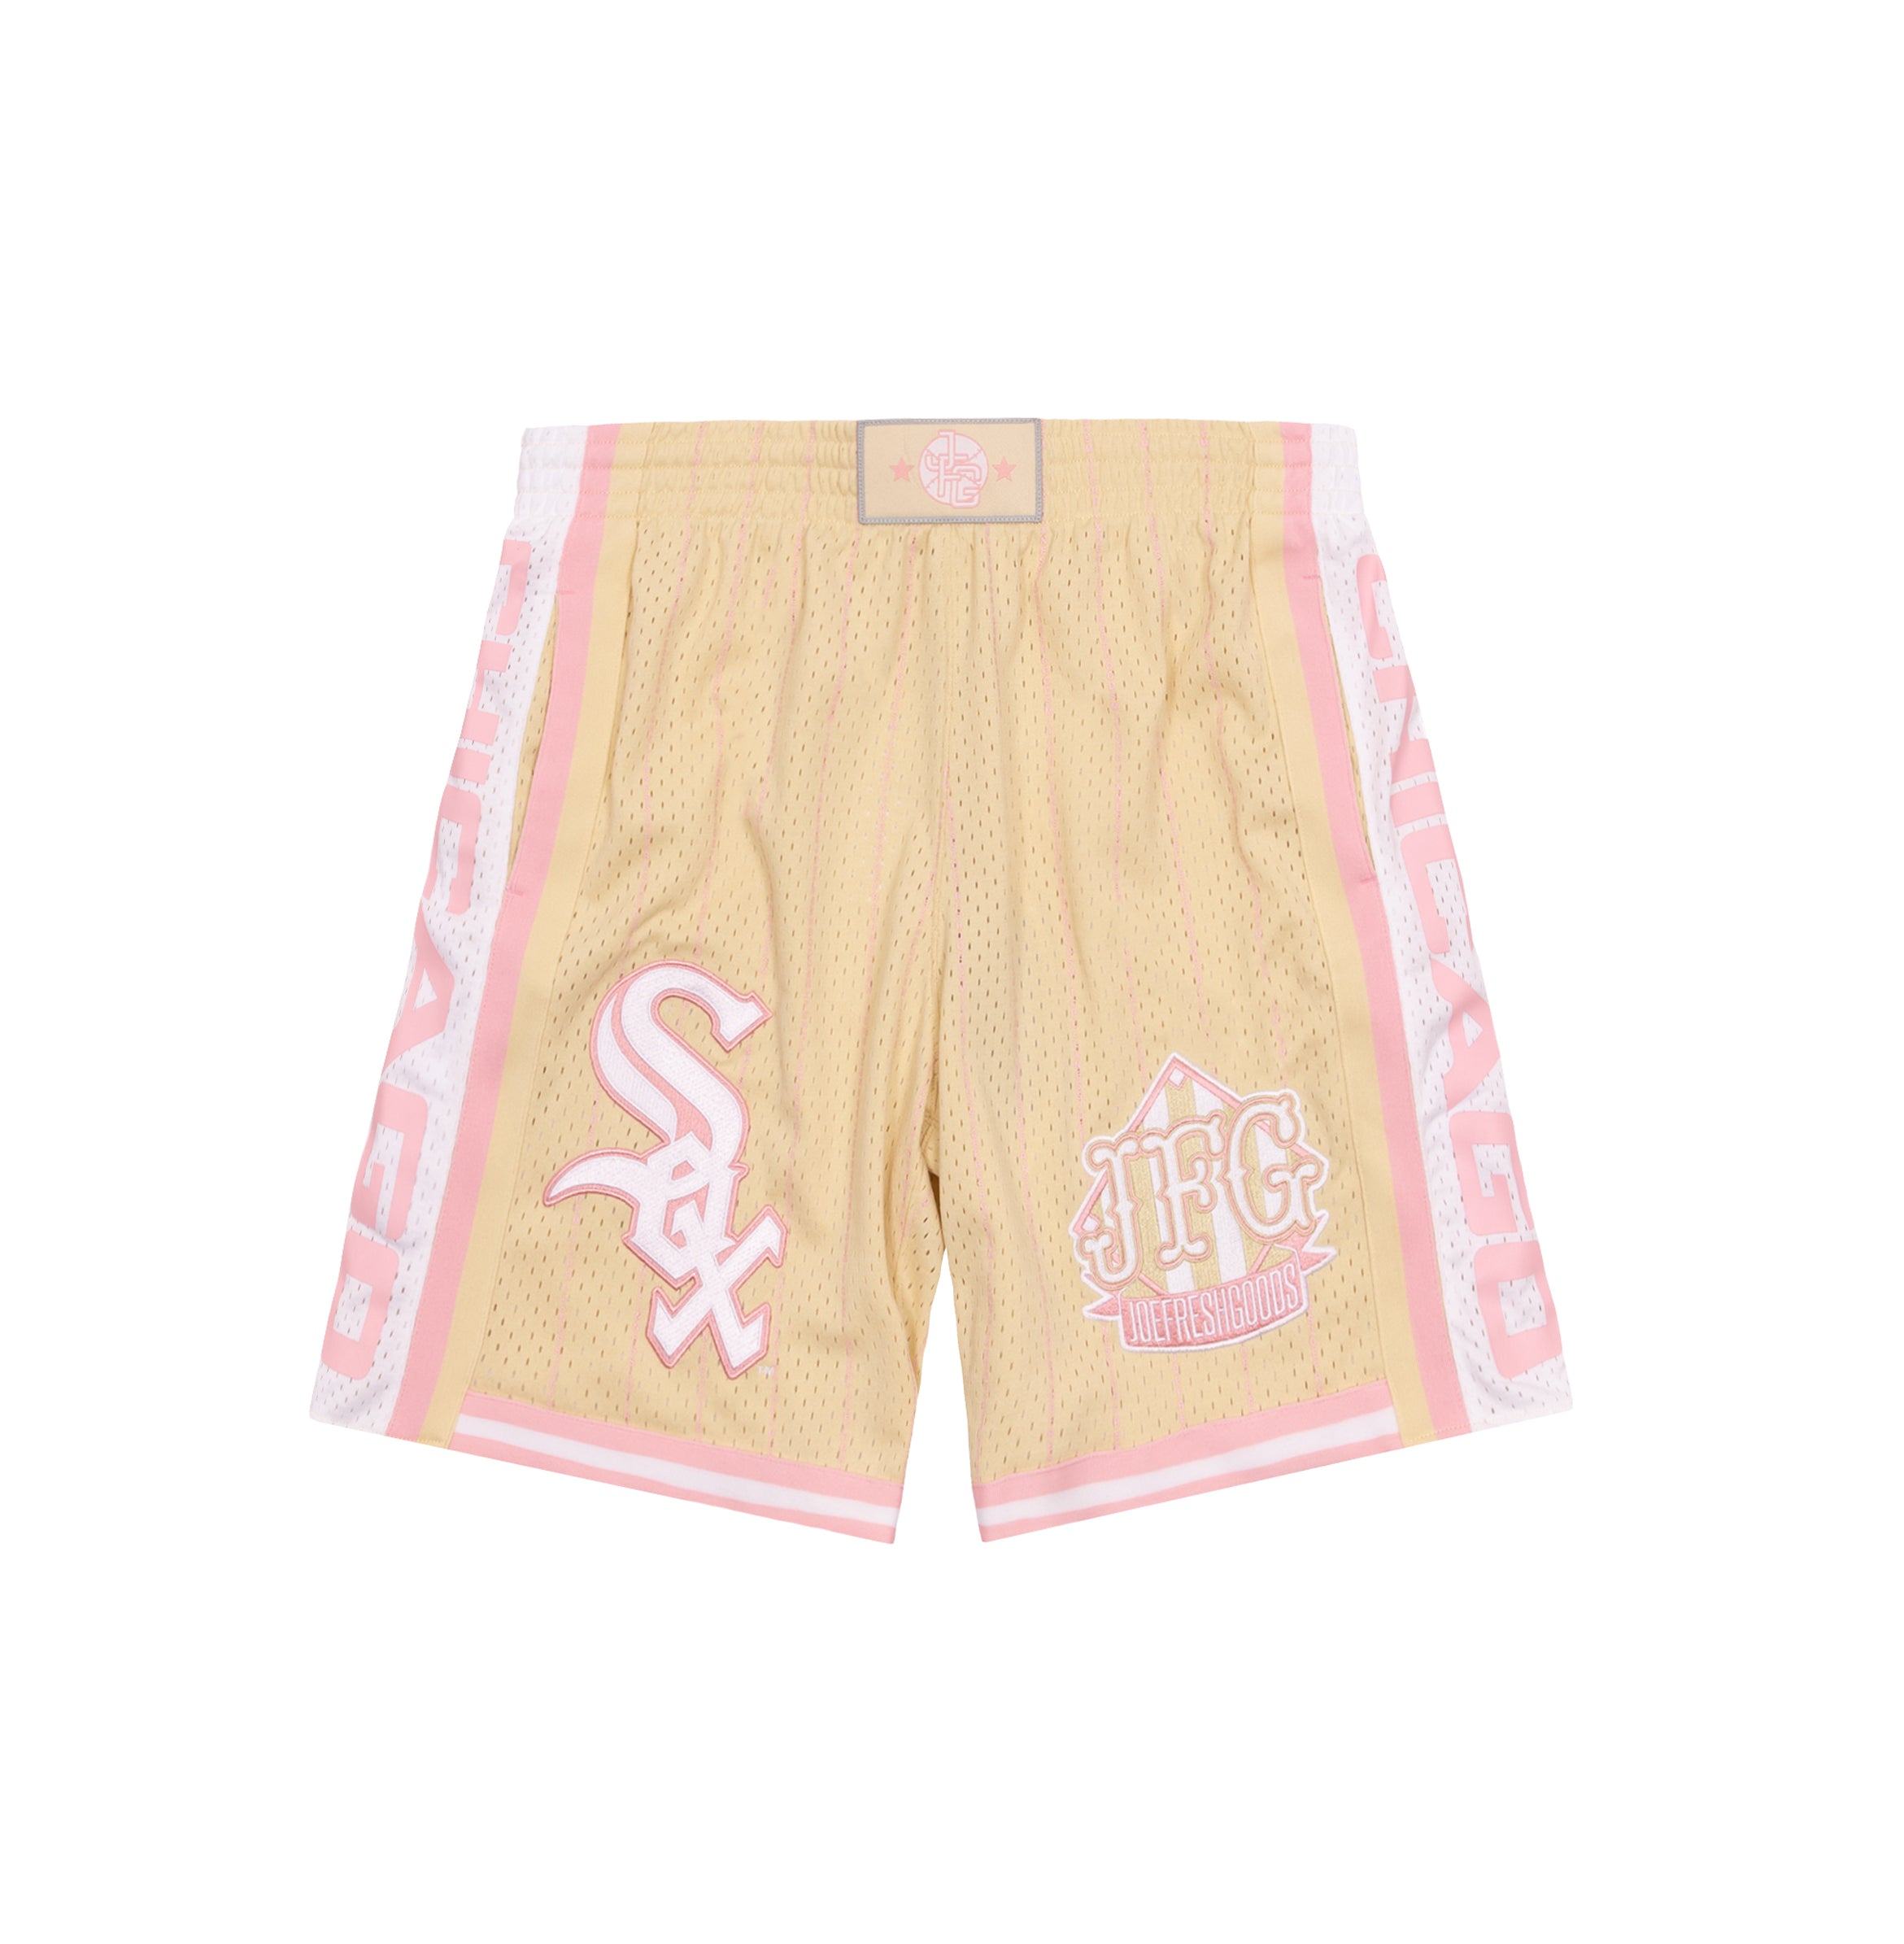 M&N x JFG Flame Shorts Chicago White Sox - Shop Mitchell & Ness Shorts and  Pants Mitchell & Ness Nostalgia Co.